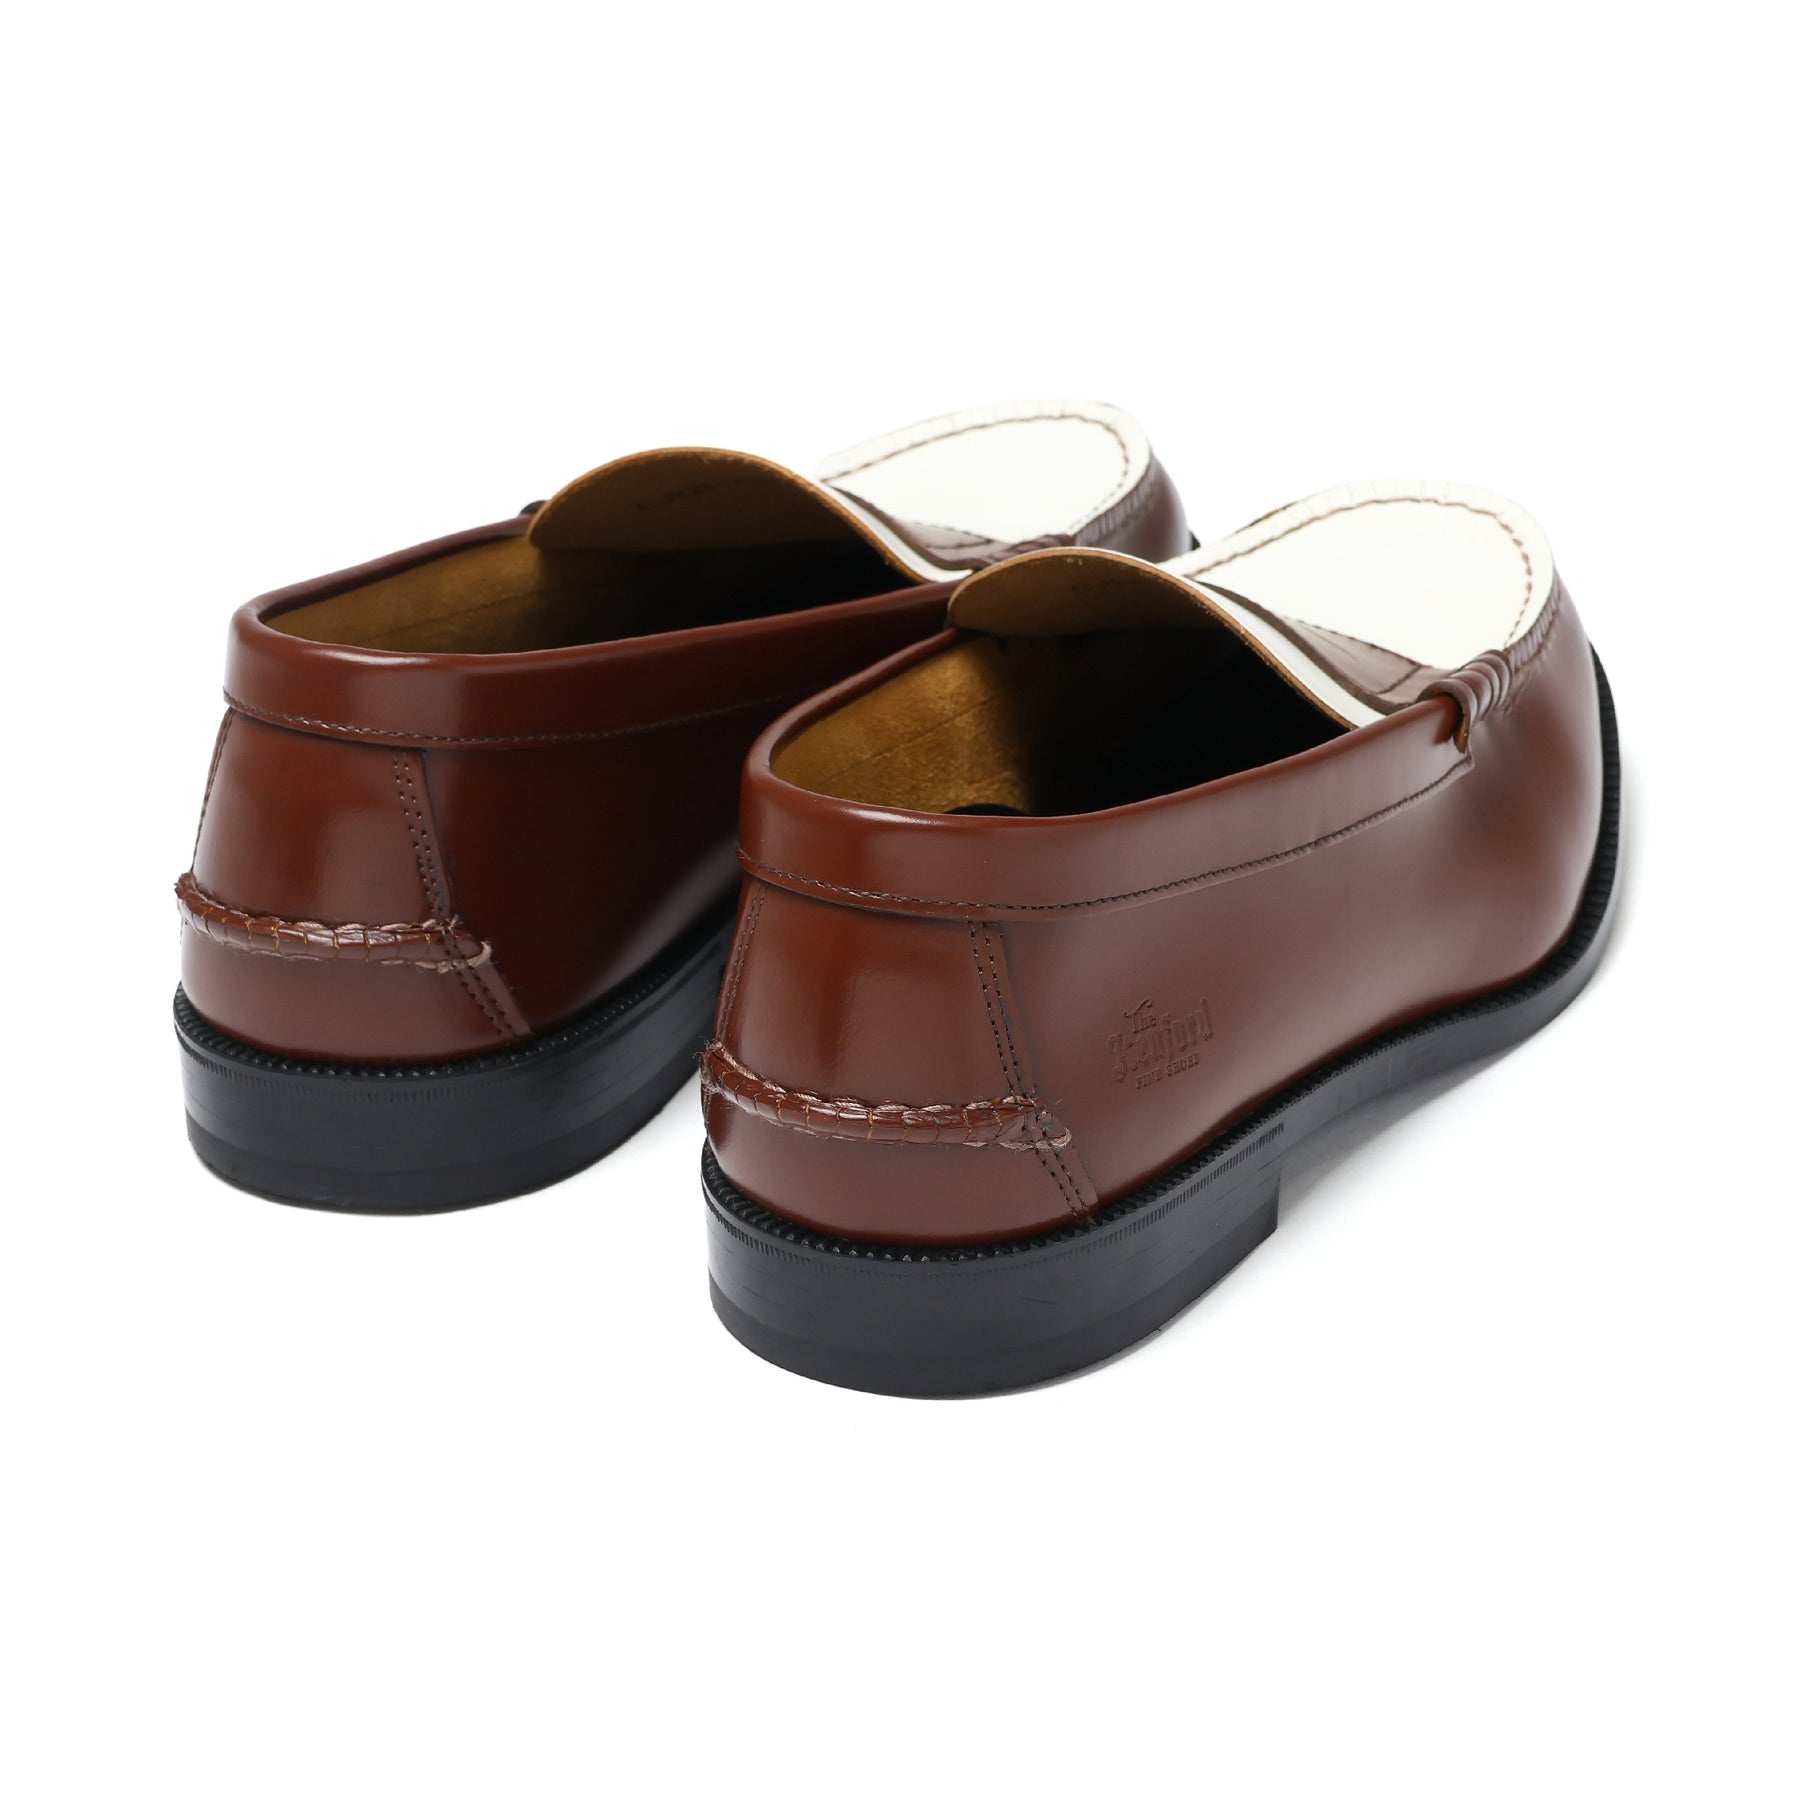 THE KENFORD FINESHOES official mail order